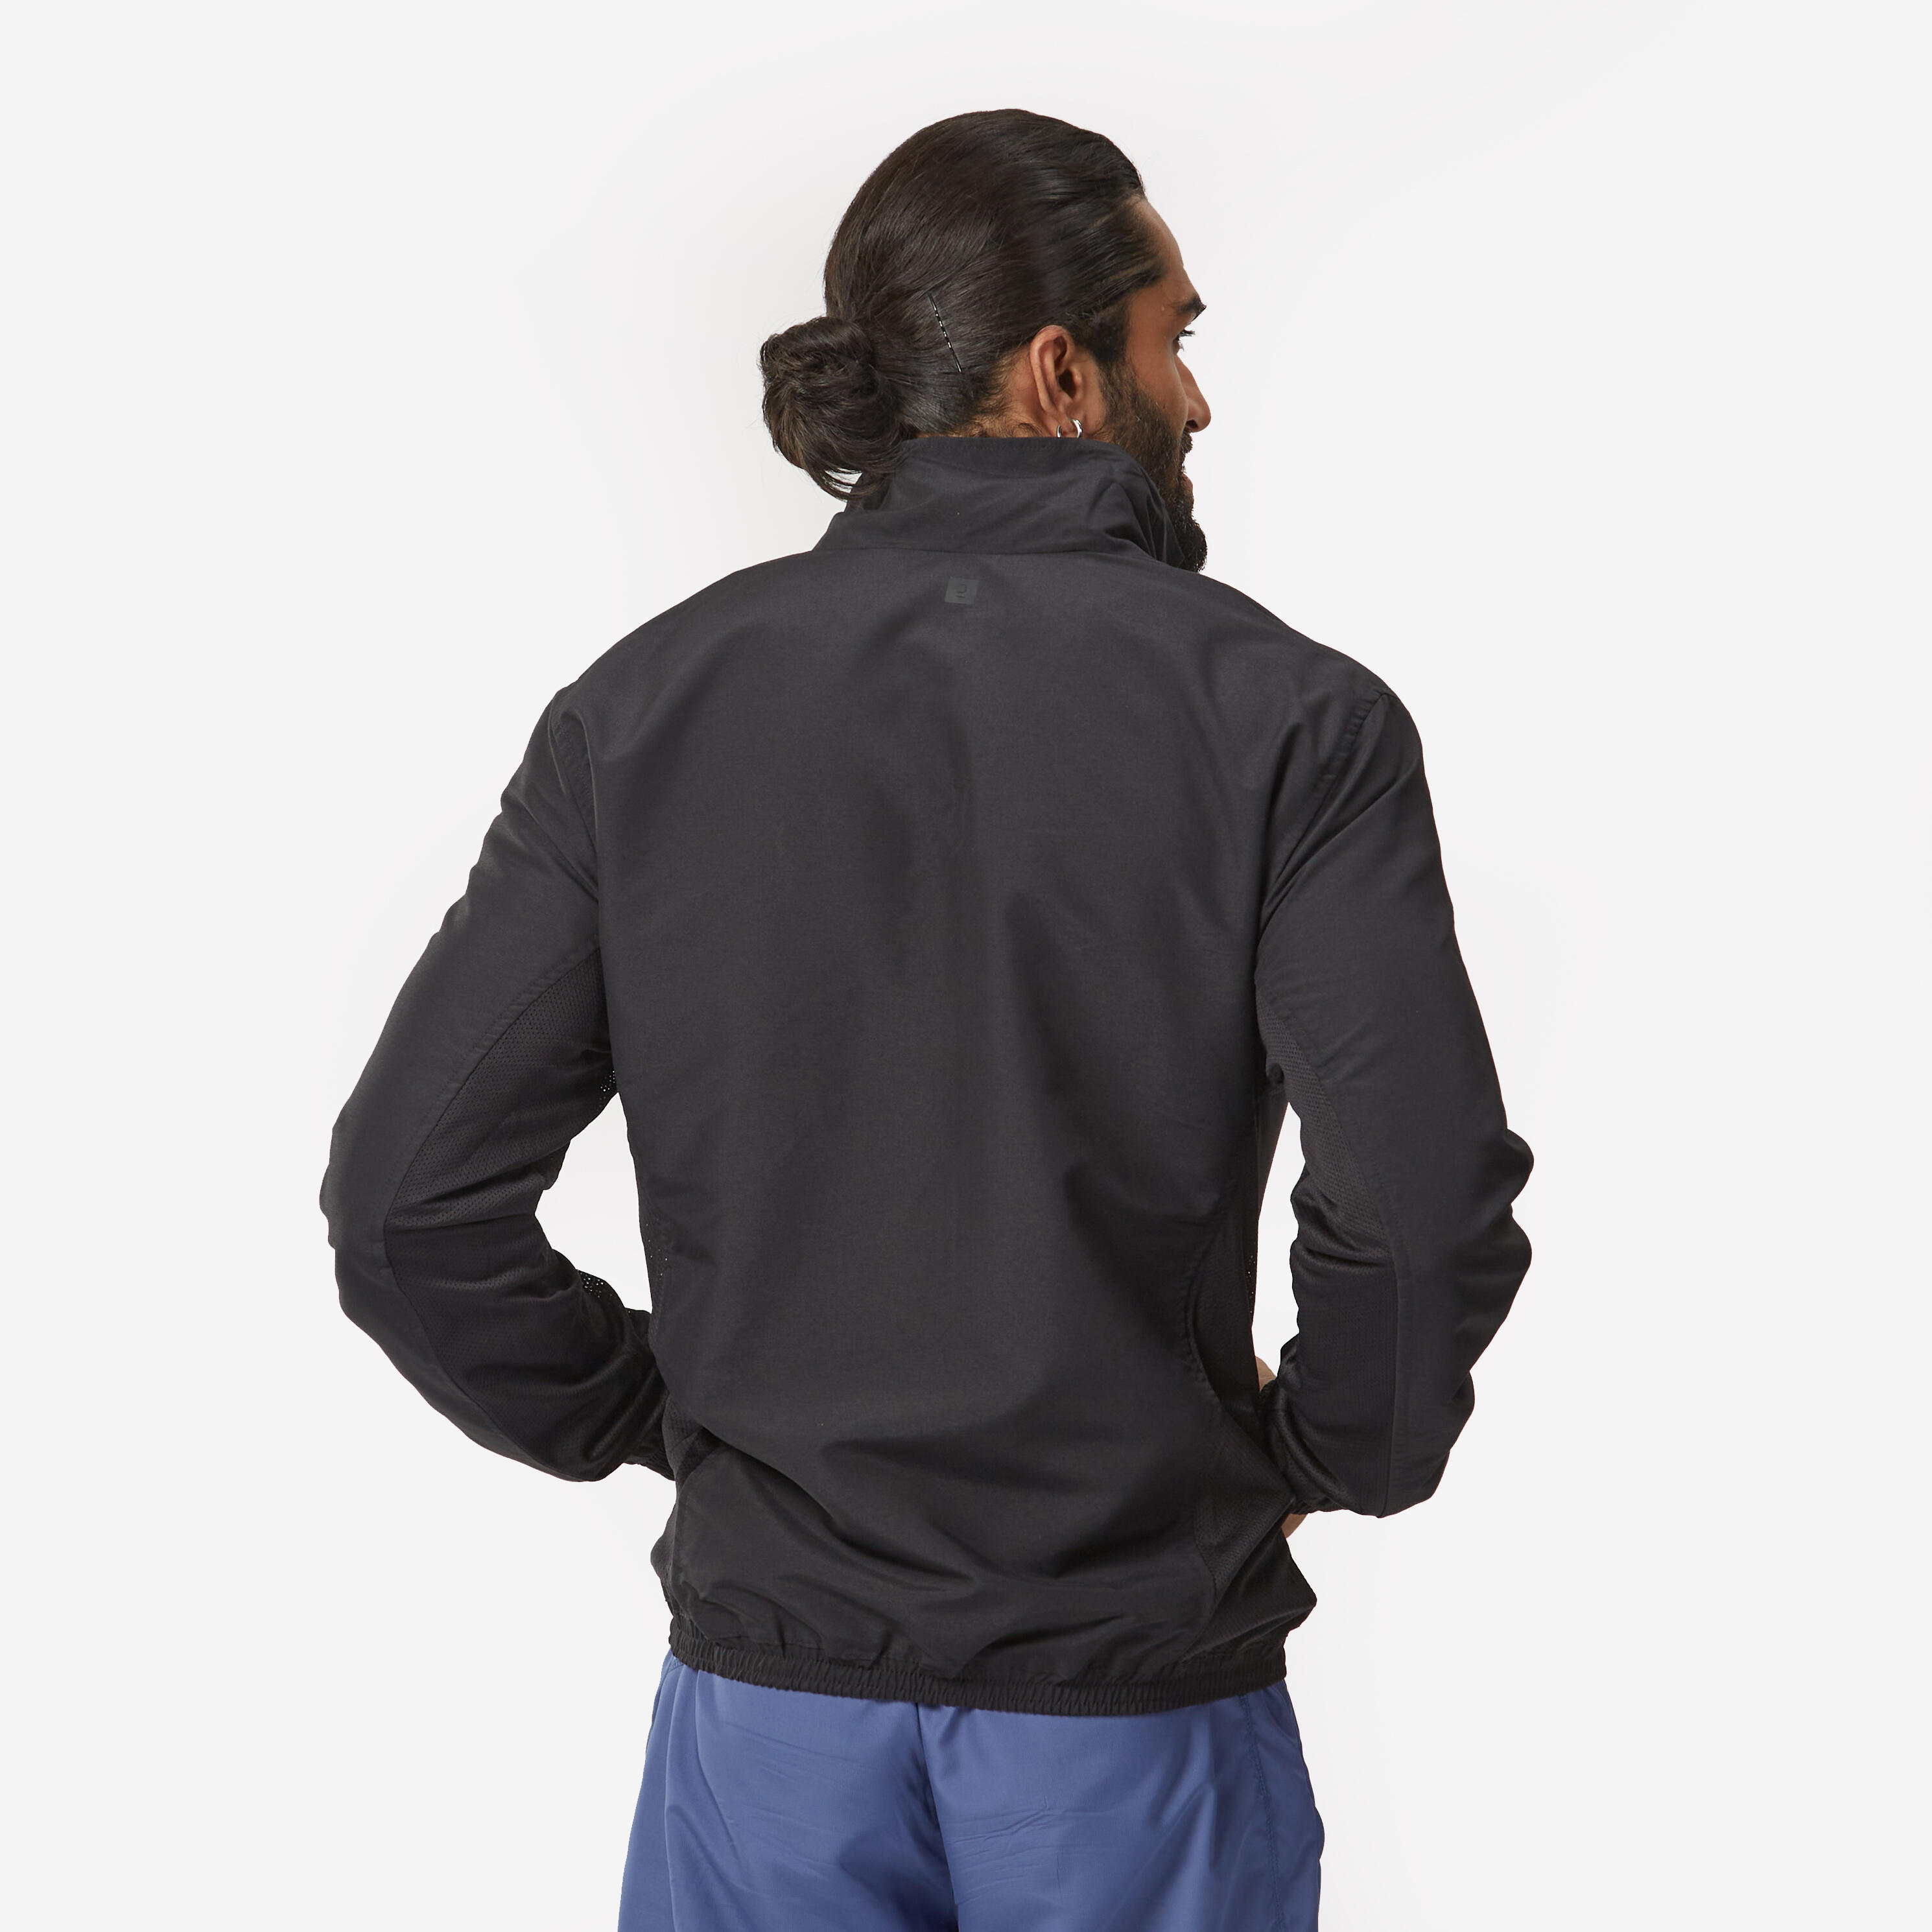 Buy Quechua ARPENAZ 20 Men's Jacket (Black, L) Online at Low Prices in  India - Amazon.in